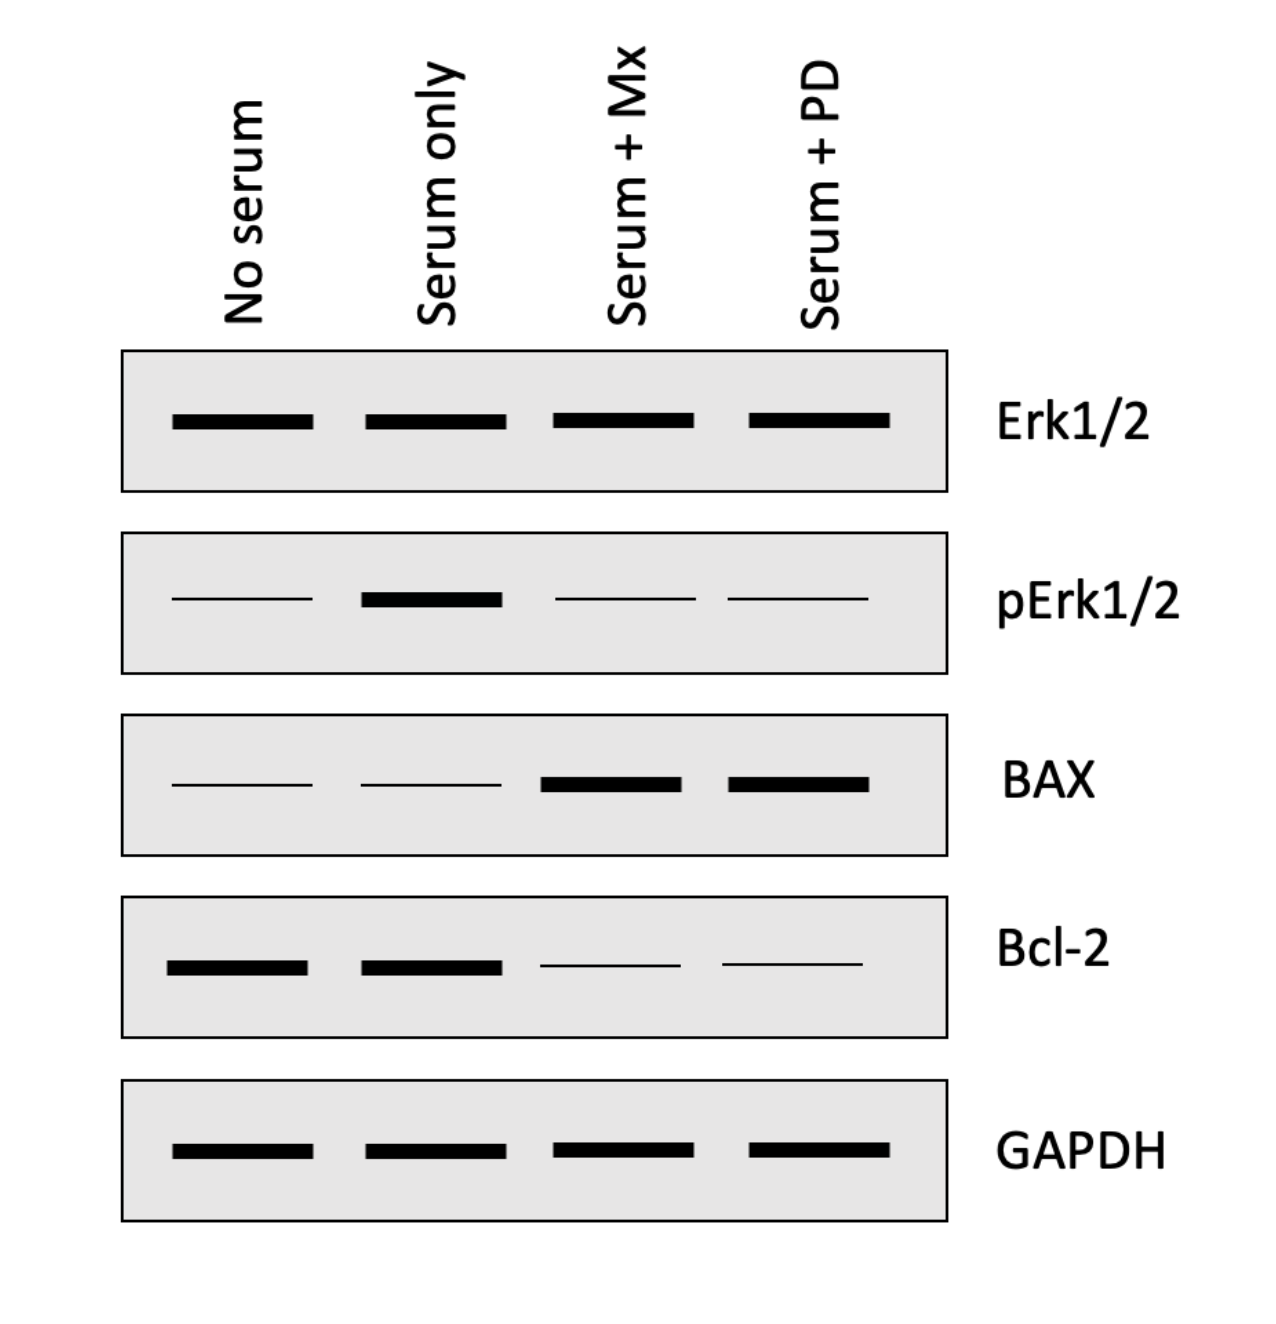 <p>The following four questions refer to the Western blot below that investigated how a chemotherapeutic drug methotrexate (Mx) impacts the activation of the ERK1/2 and apoptosis pathways in HeLa cells (malignant cervical cancer cells).  Cells were either serum starved (no serum) or grown in serum containing media with or without PD184352 (PD; ERK1/2 inhibitor) or Mx.</p><p></p><p>Based on what we saw in class, if you had run a western blot to detect <strong>Cyclin D1</strong>, in which of the lanes would you have expected to see a thick/intense band?  One or more may be correct, so select all that apply:</p><ol><li><p>Choice 1 of 4:No serum</p></li><li><p>Choice 2 of 4:Serum + Mx</p></li><li><p>Choice 3 of 4:Serum + PD</p></li><li><p>Choice 4 of 4:Serum only</p></li></ol>